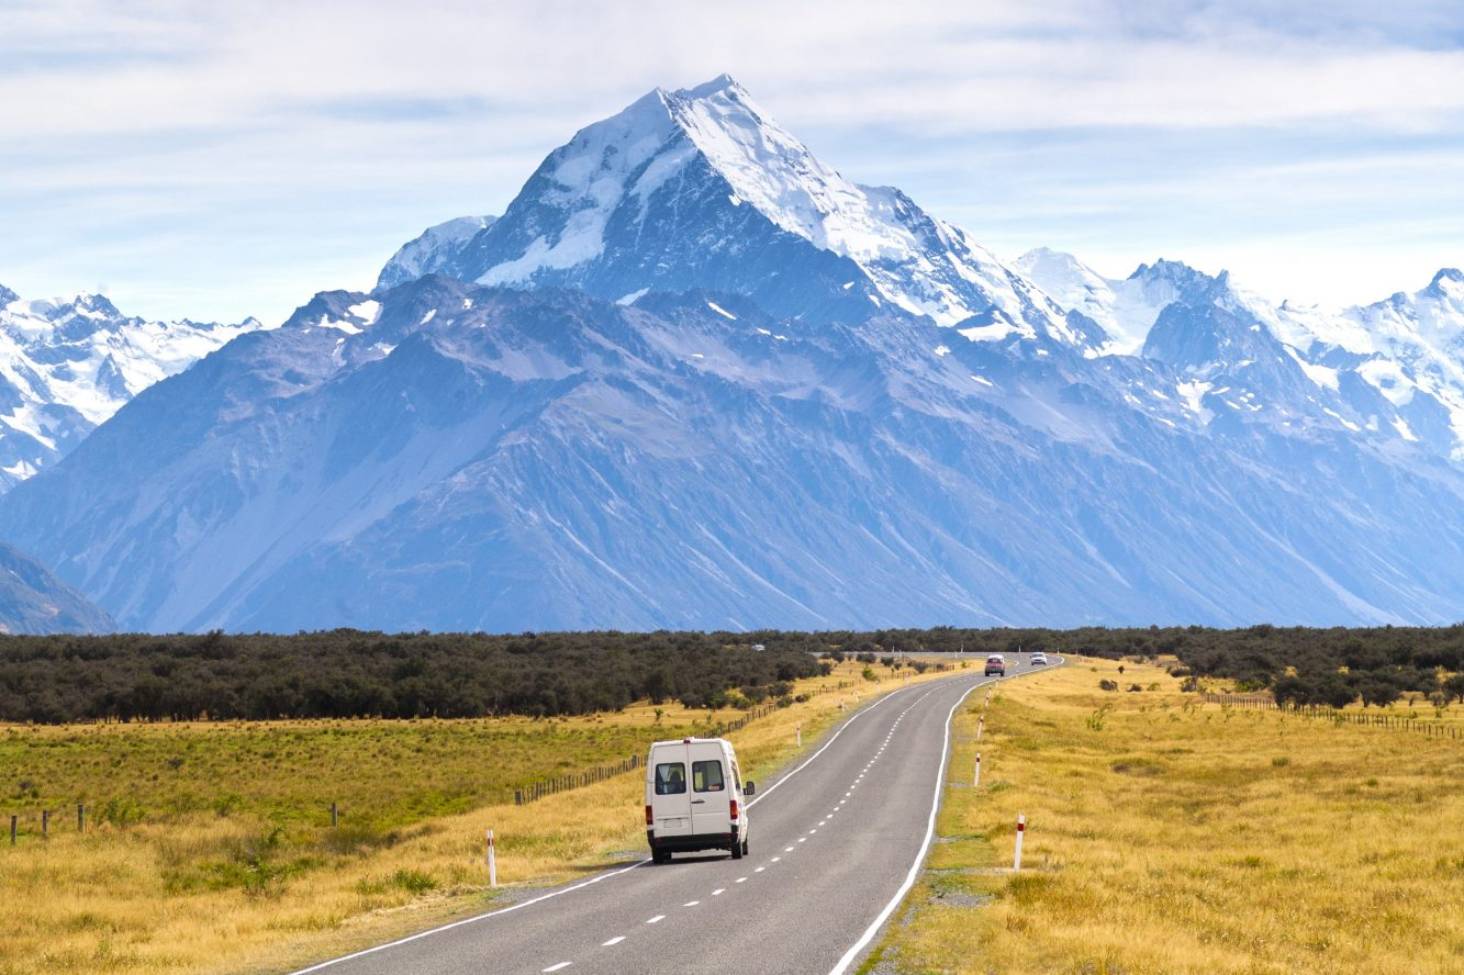 Here Are 24 Glorious Natural Attractions – Can You Match Them to Their Country? Mount Cook, New Zealand